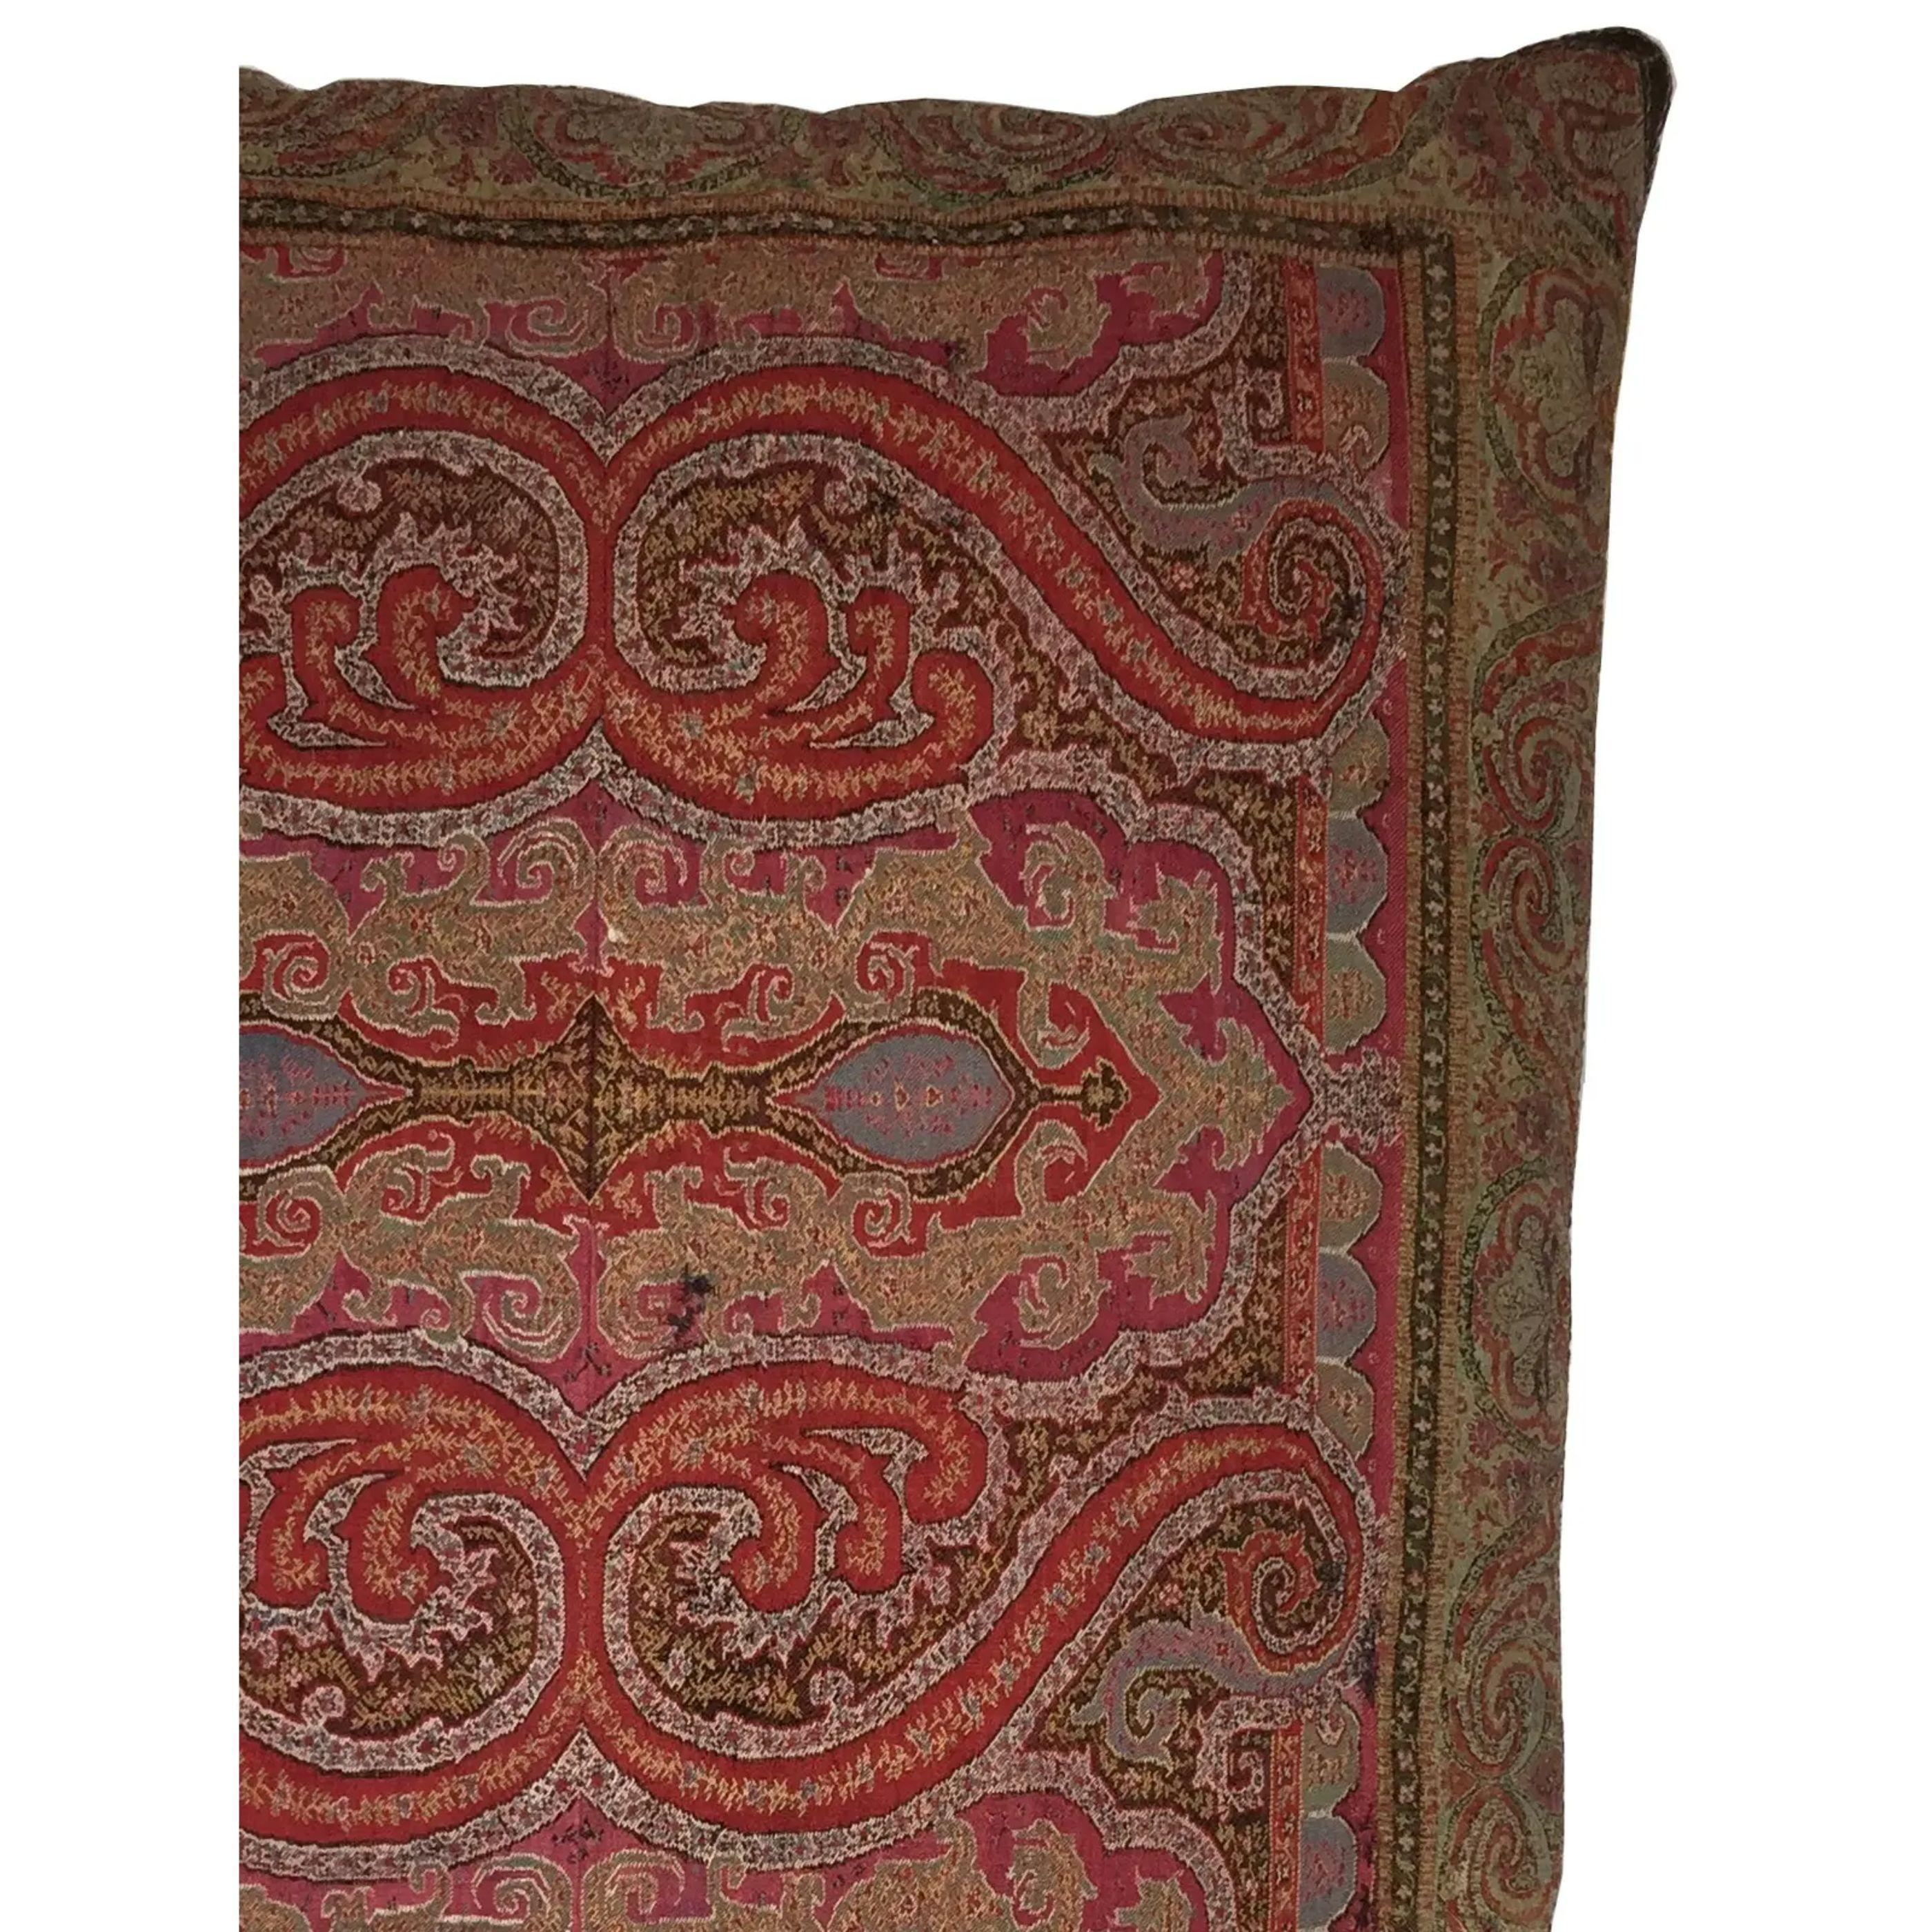 Ca.1820 antique Indian Keshmir pillow 29'' x 20''. Traditional and empire style.